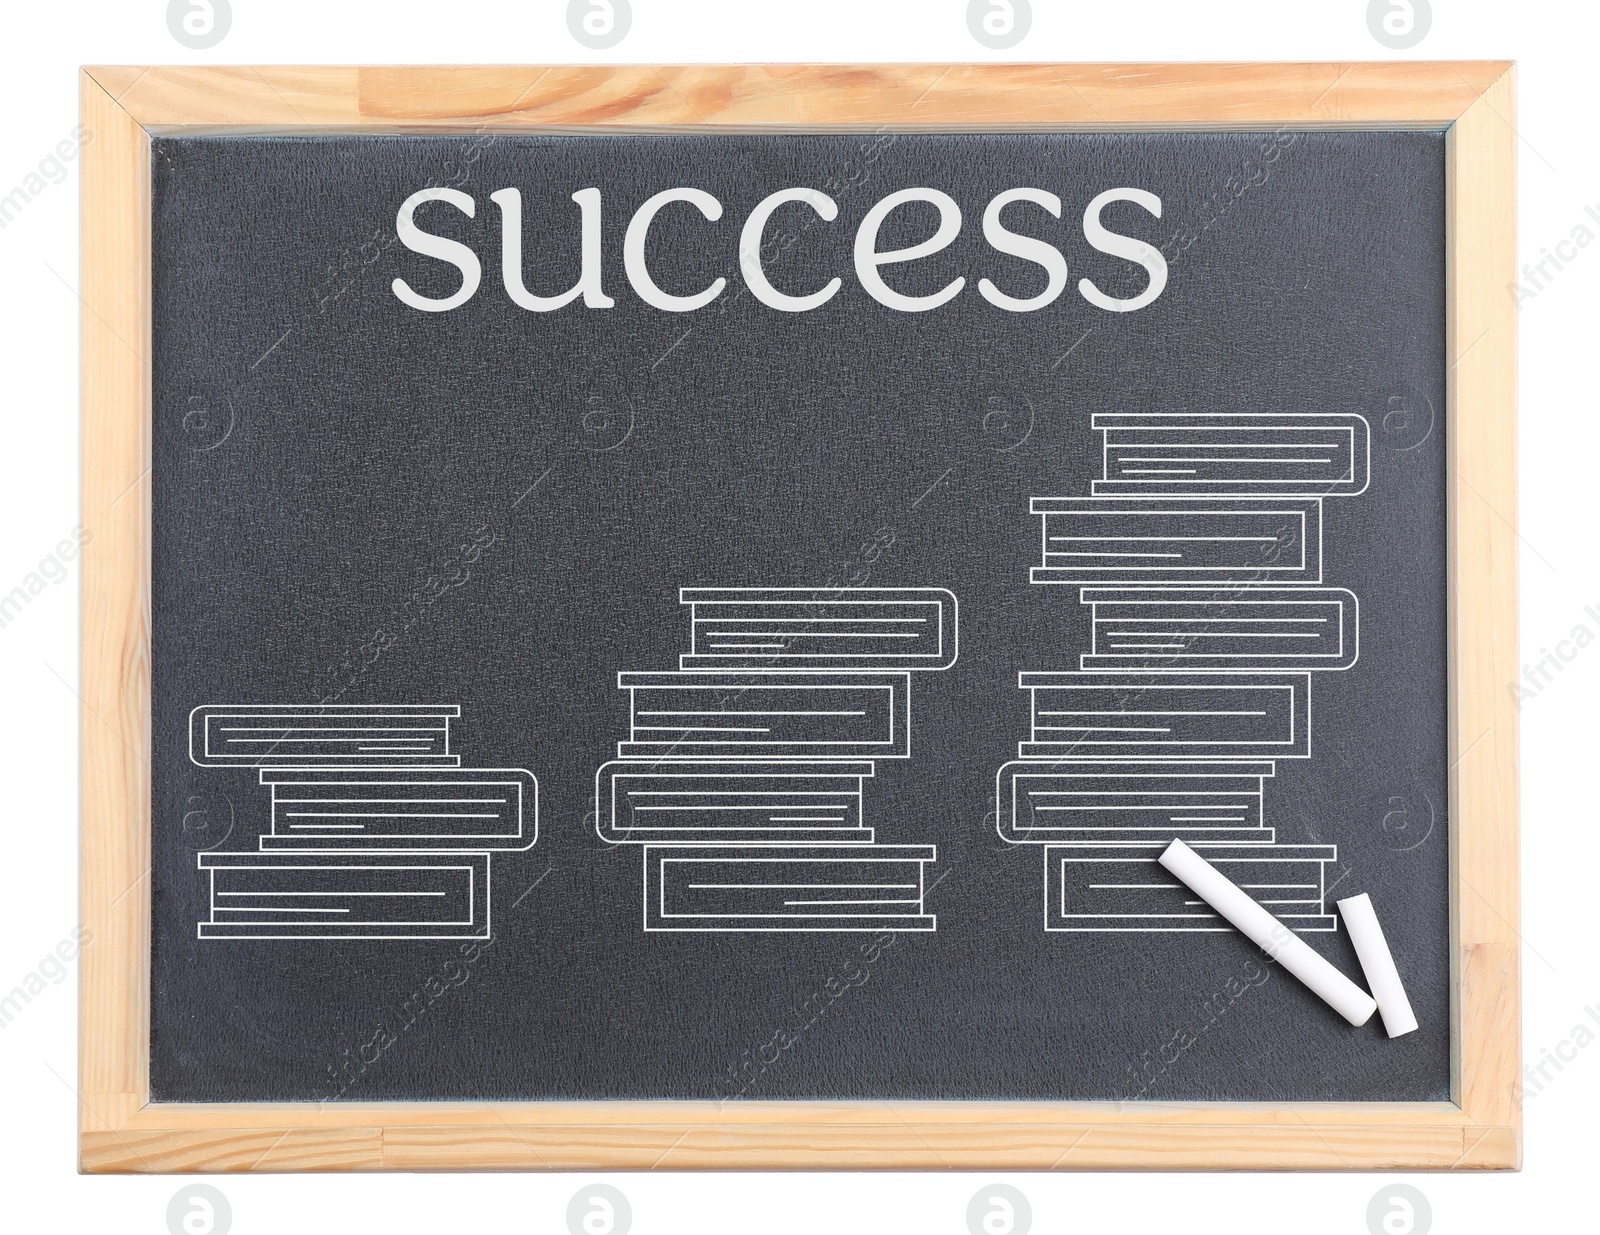 Image of Books and word Success drawn on chalkboard against white background. Career promotion concept